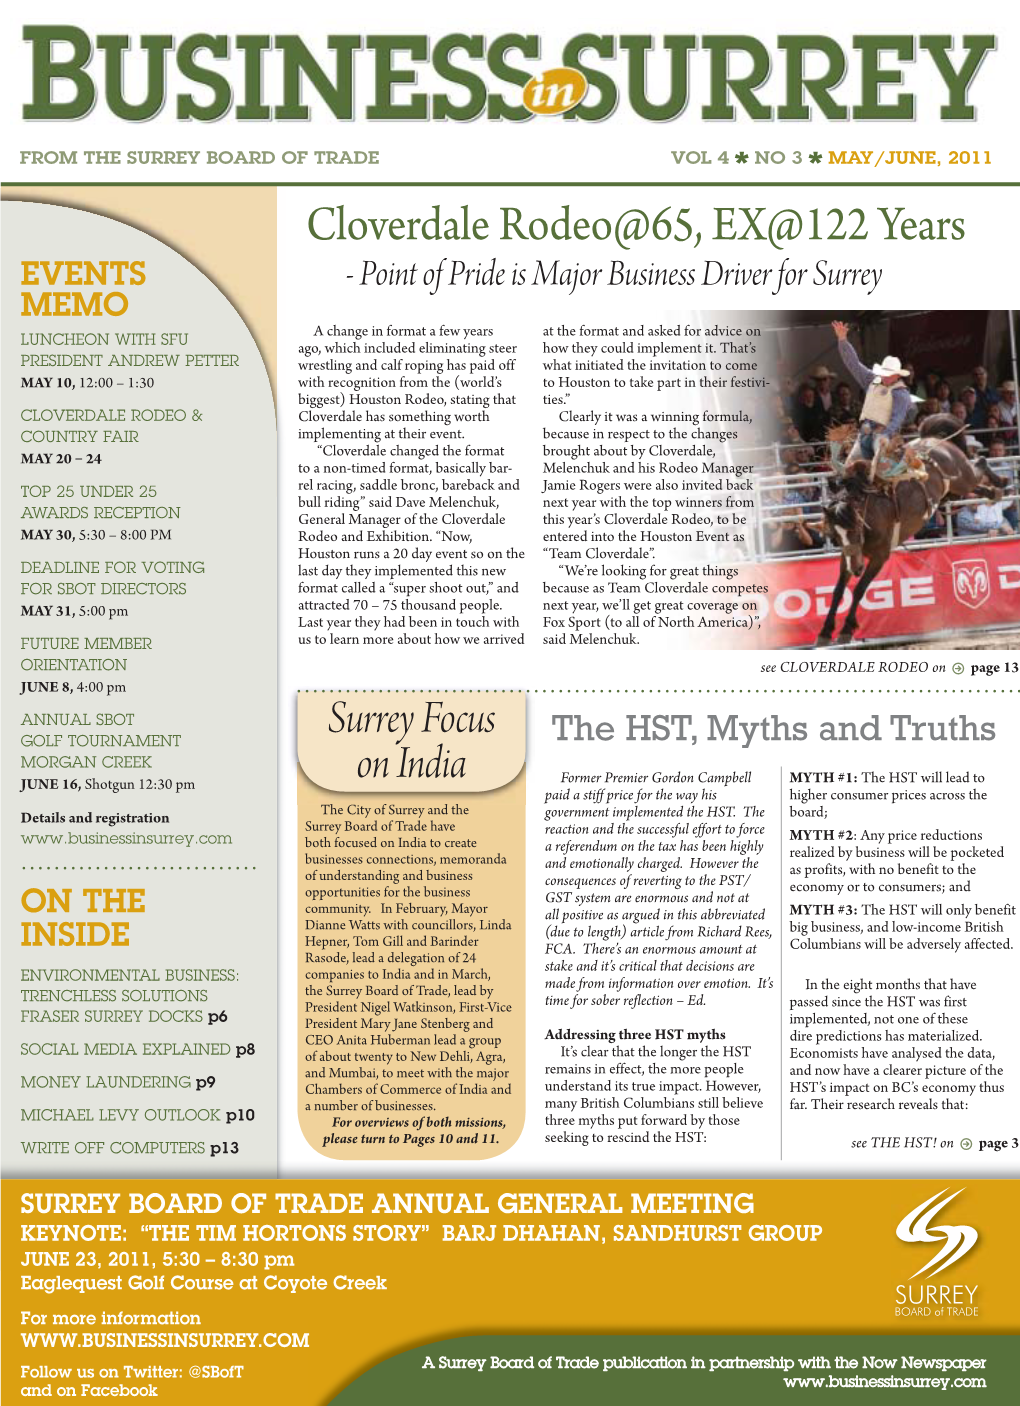 Cloverdale Rodeo@65, EX@122 Years